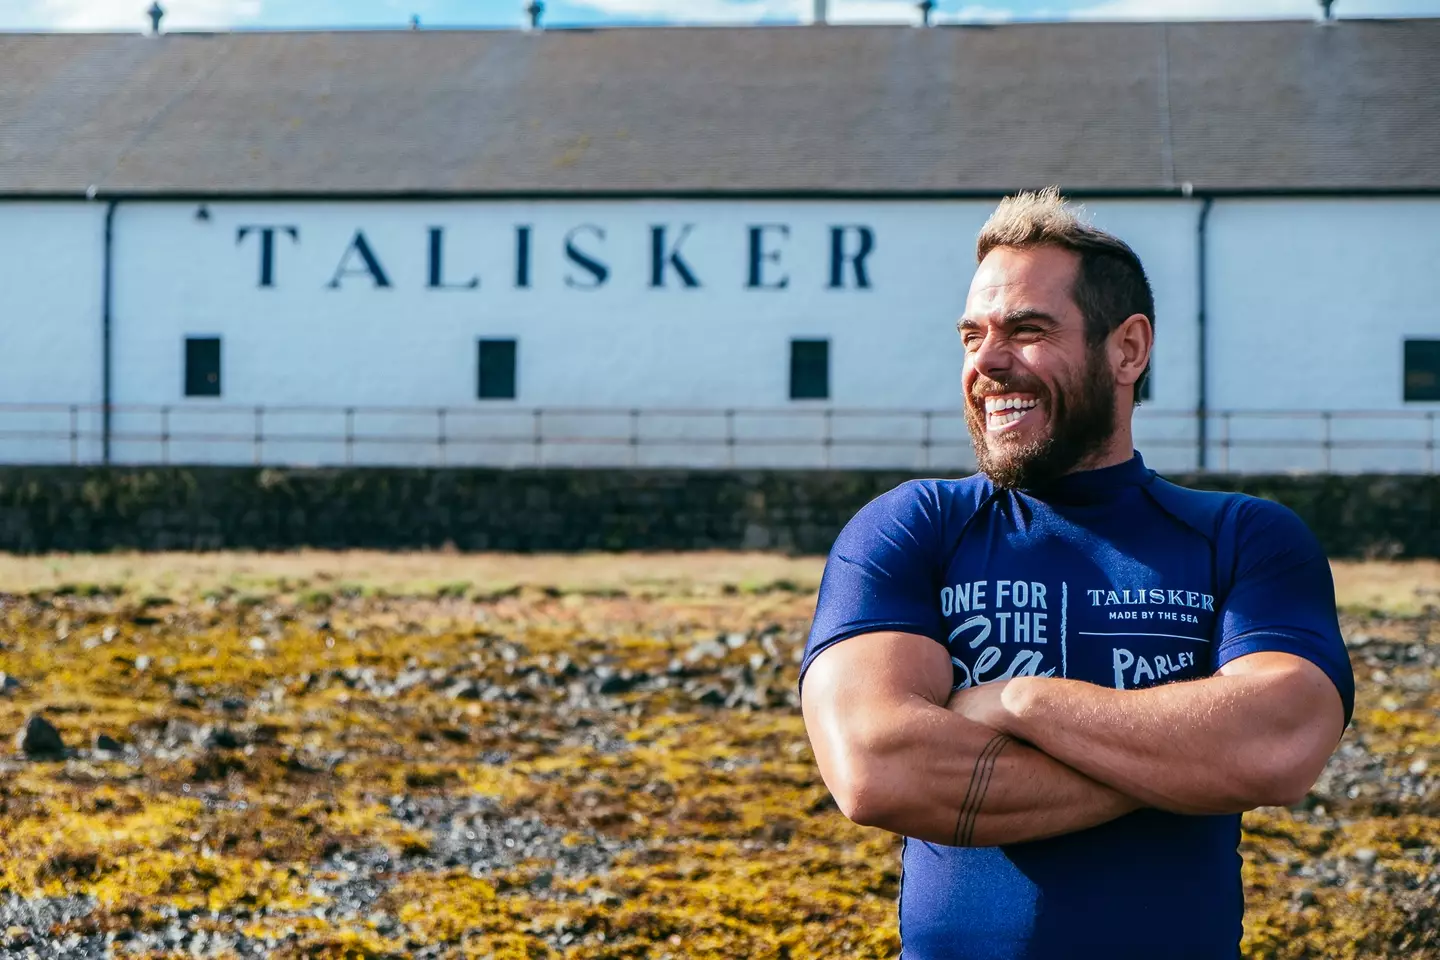 Ross did the swim in collaboration with Talisker and Parley.